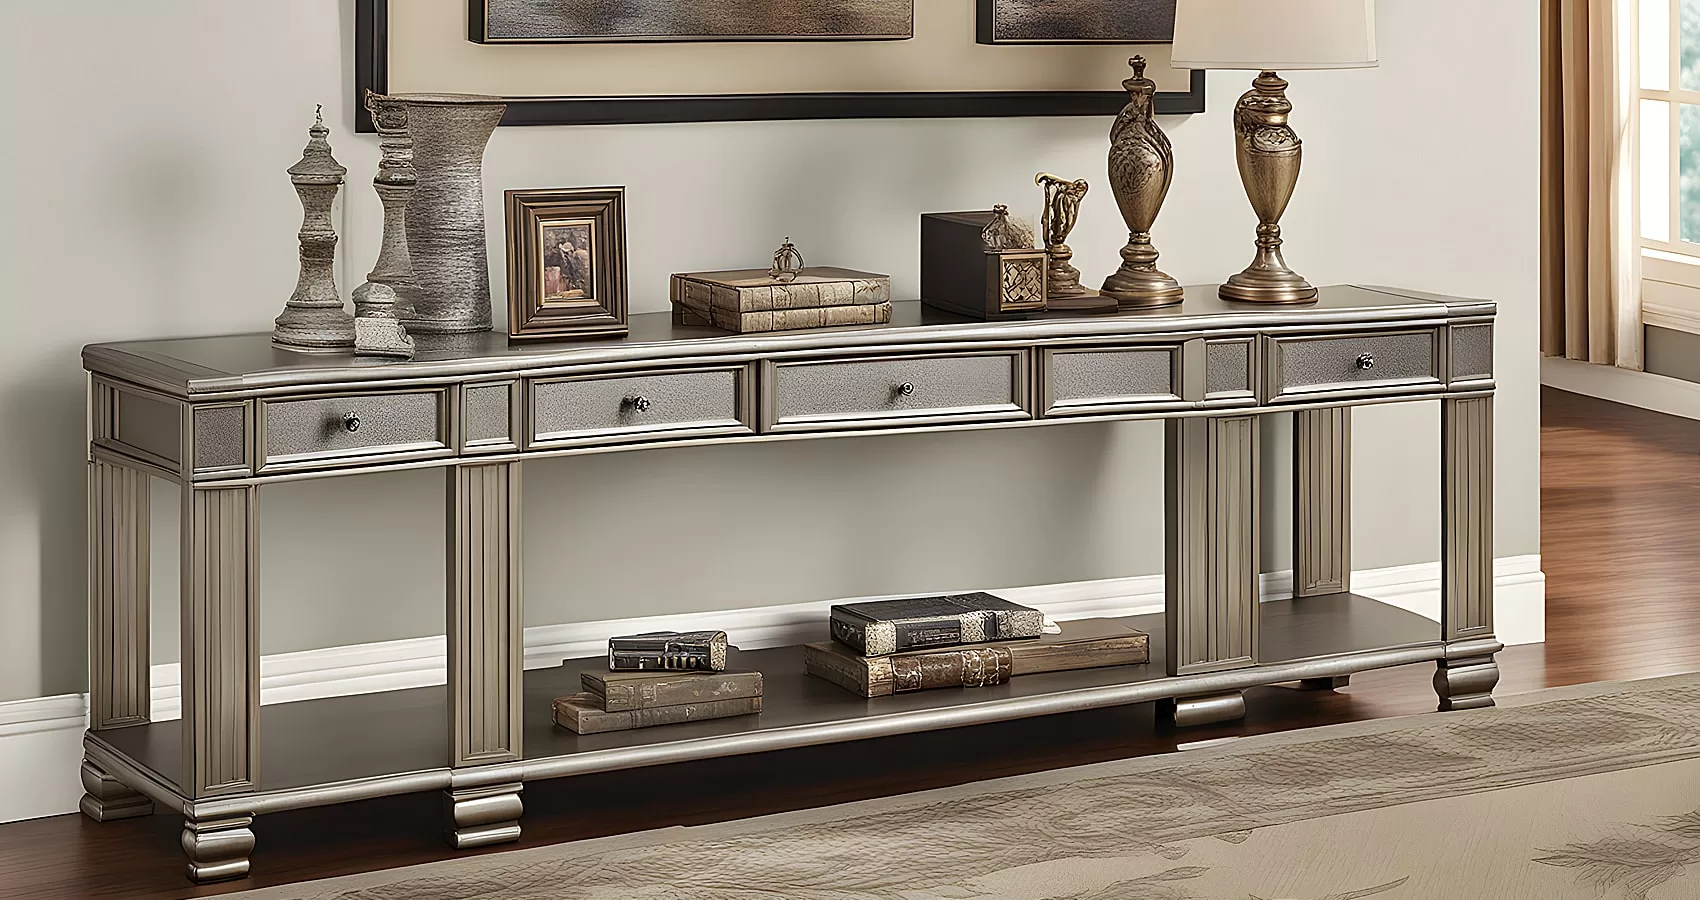 Metallic Finishes SOFA TABLE WITH DRAWERS Copy Min Jpg.webp